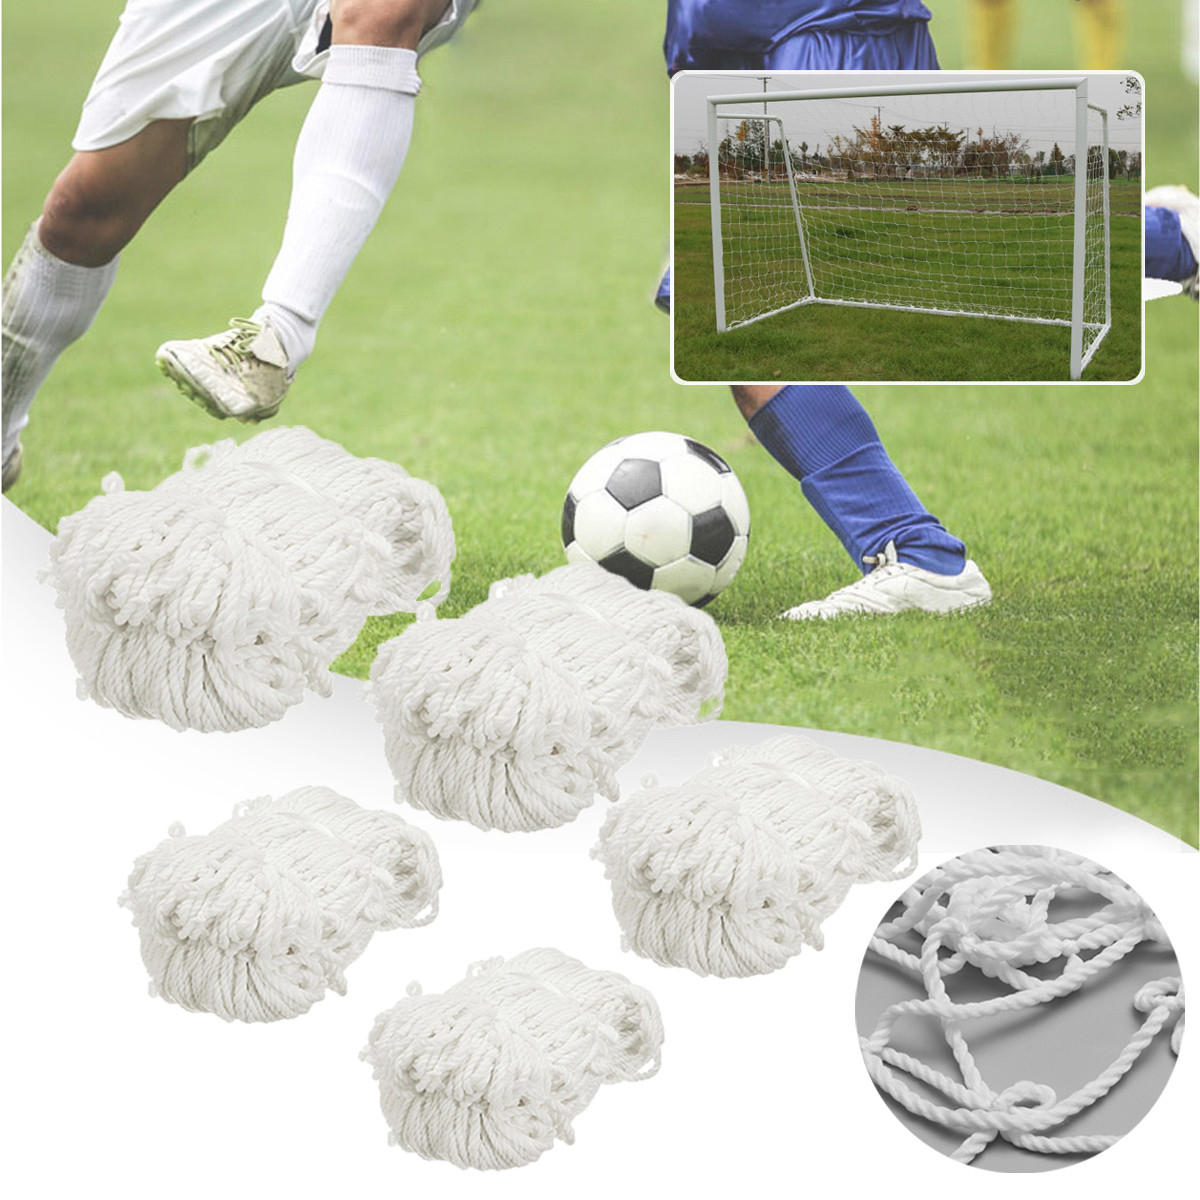 Football Soccer Goal Post Net Training Match Replace Outdoor Full Size Adult Kid